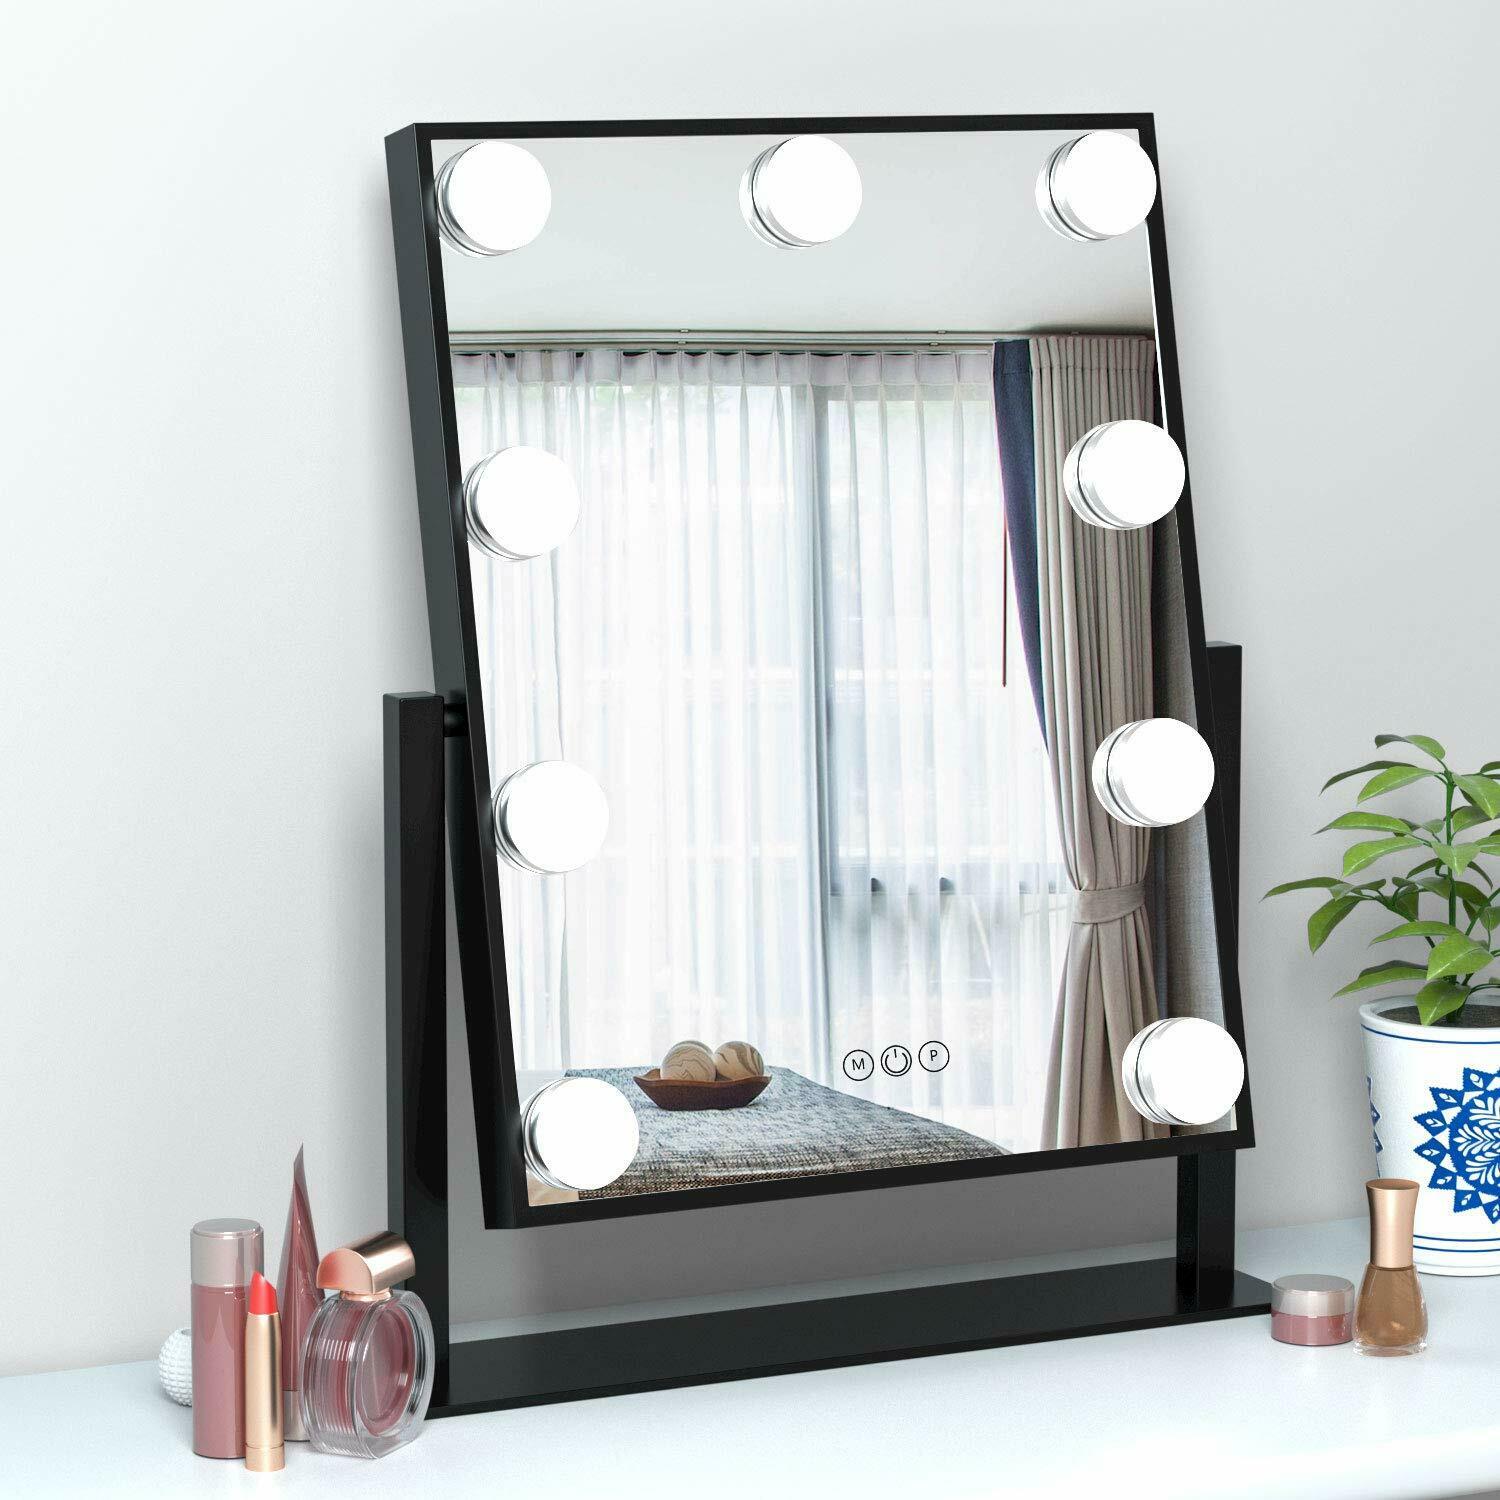 Hollywood Mirror with Light Large Lighted Makeup Mirror Vanity Makeup Mirror Smart Touch Control 10X Magnification 360°Rotation